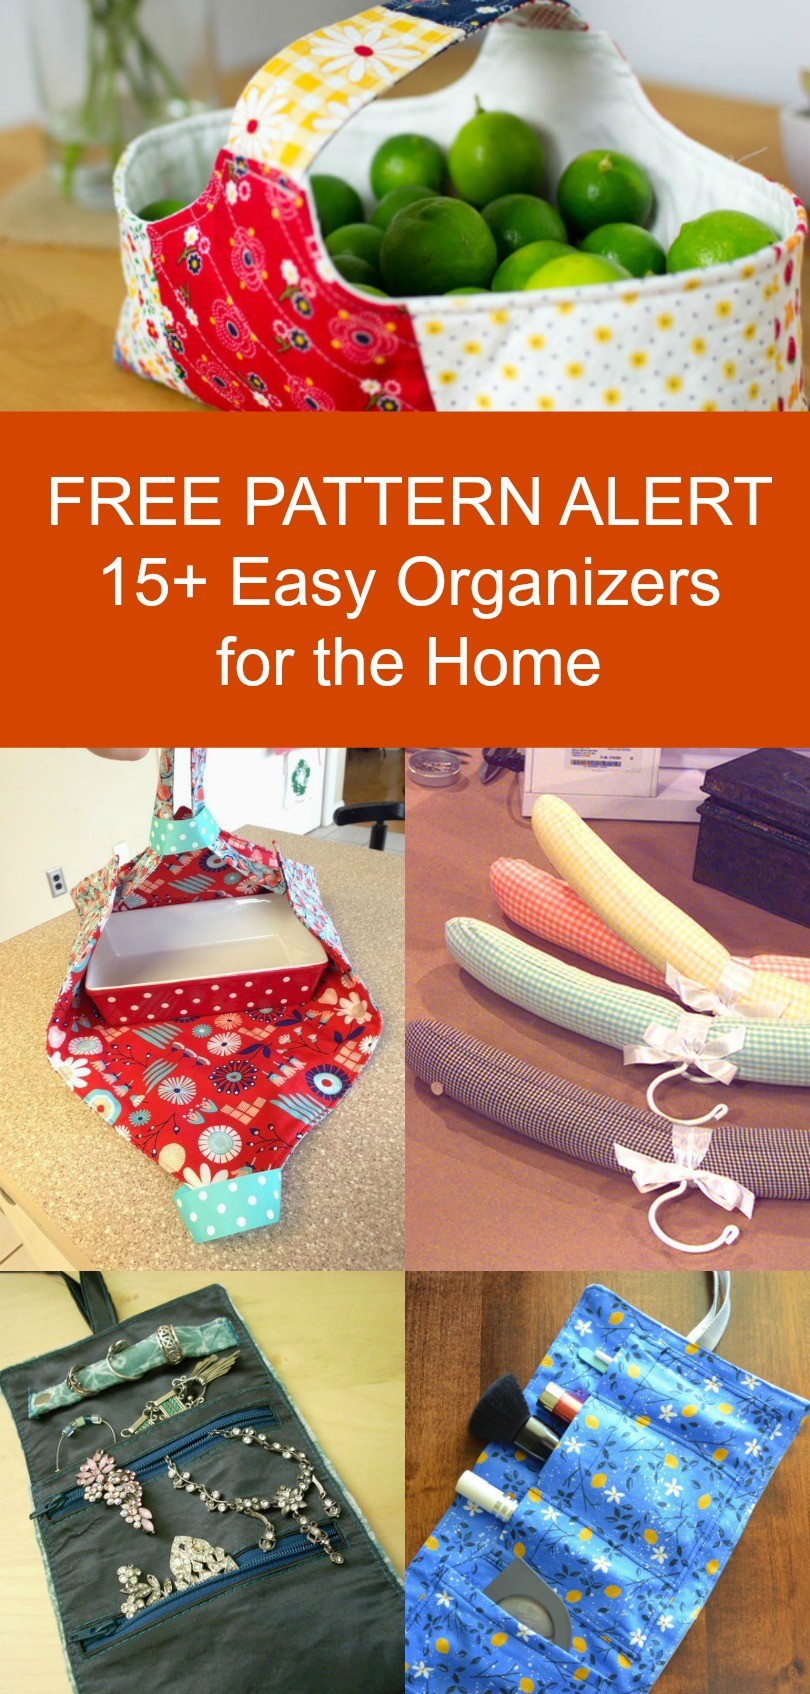 FREE PATTERN ALERT: 20+ Free Projects to sew for house warming